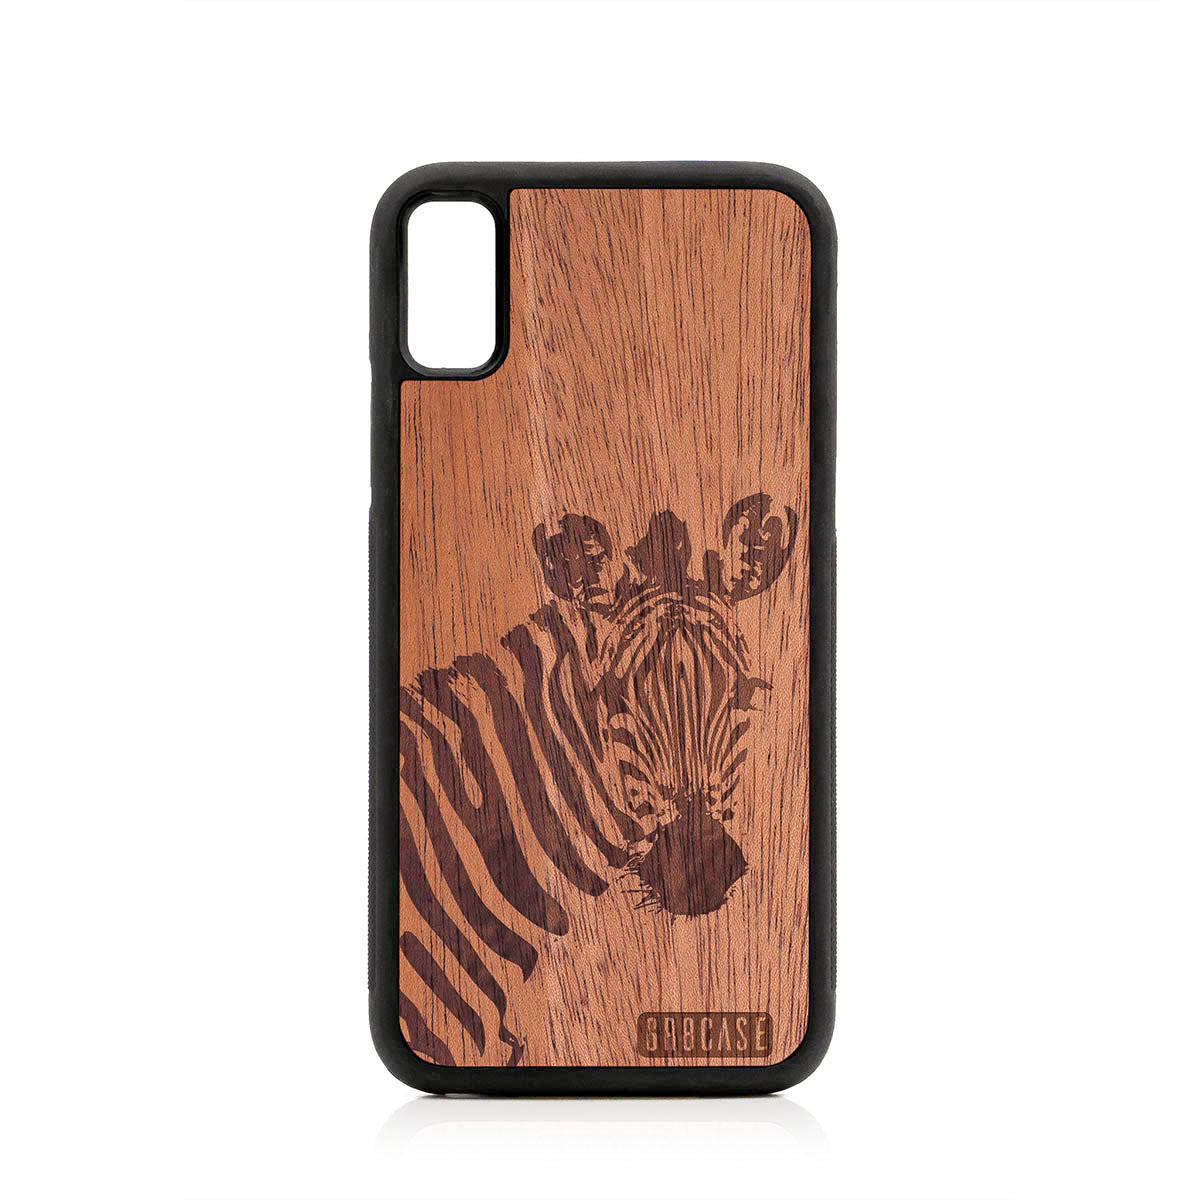 Lookout Zebra Design Wood Case For iPhone XR